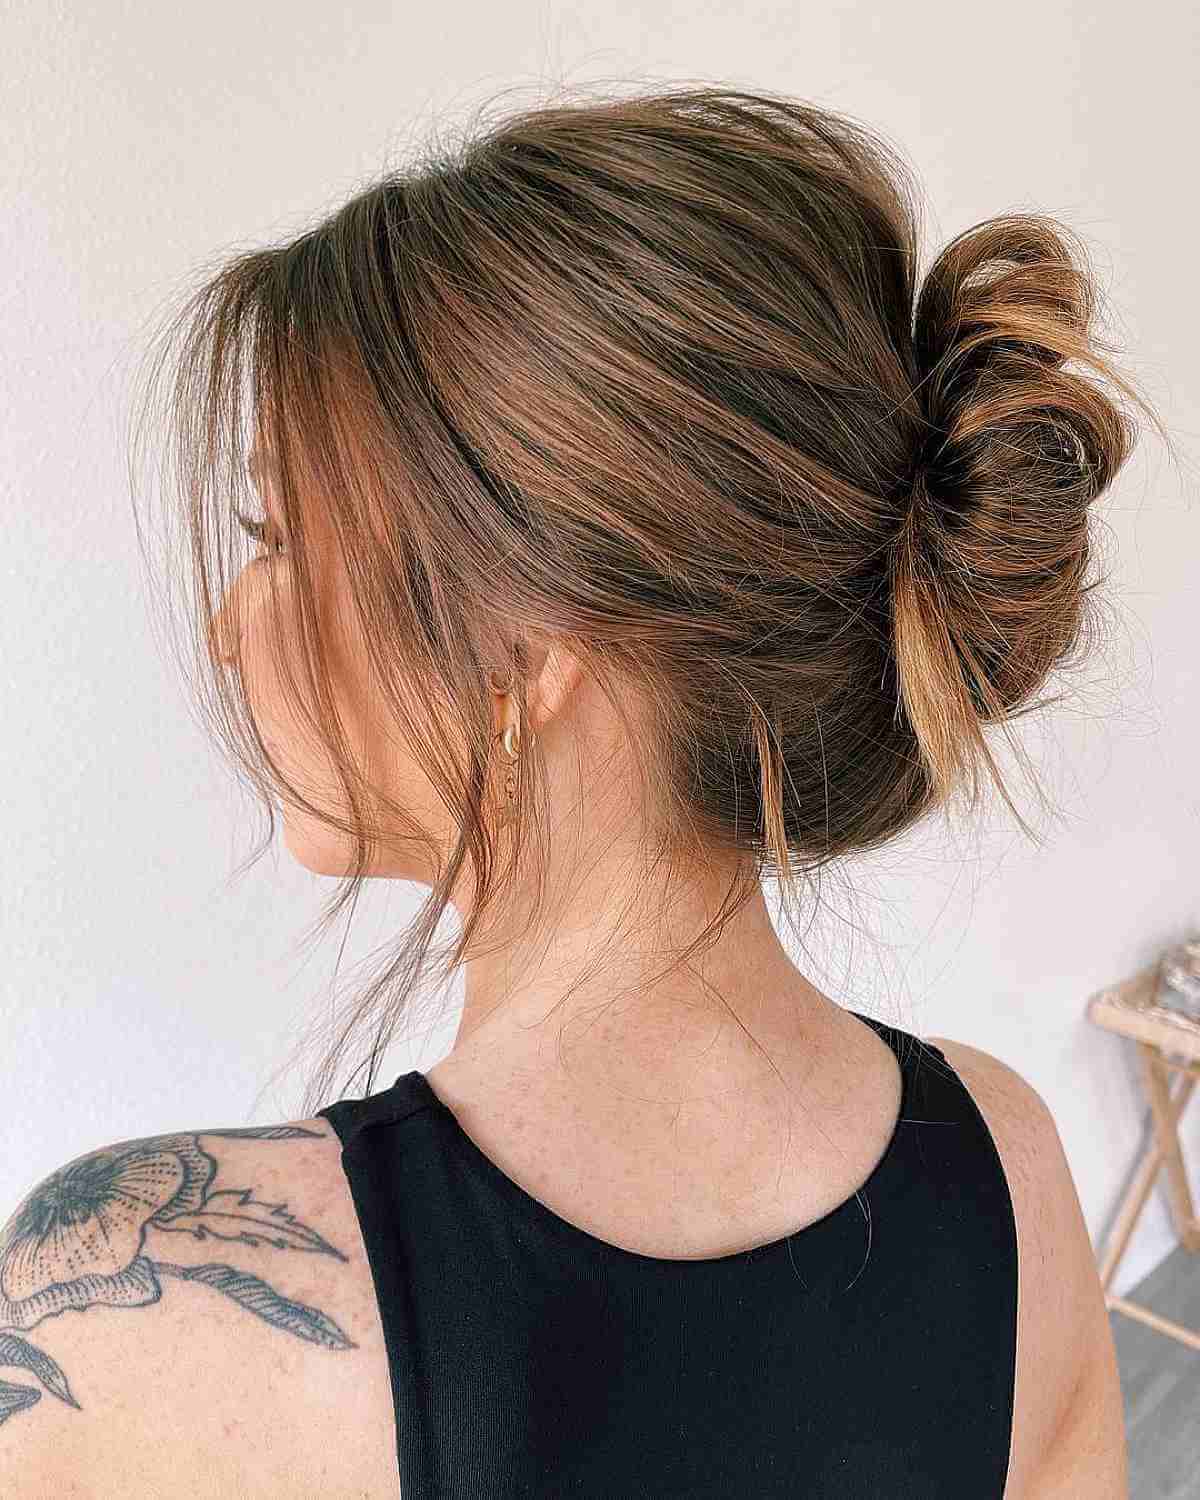 Perfect casual updo shoulder-length